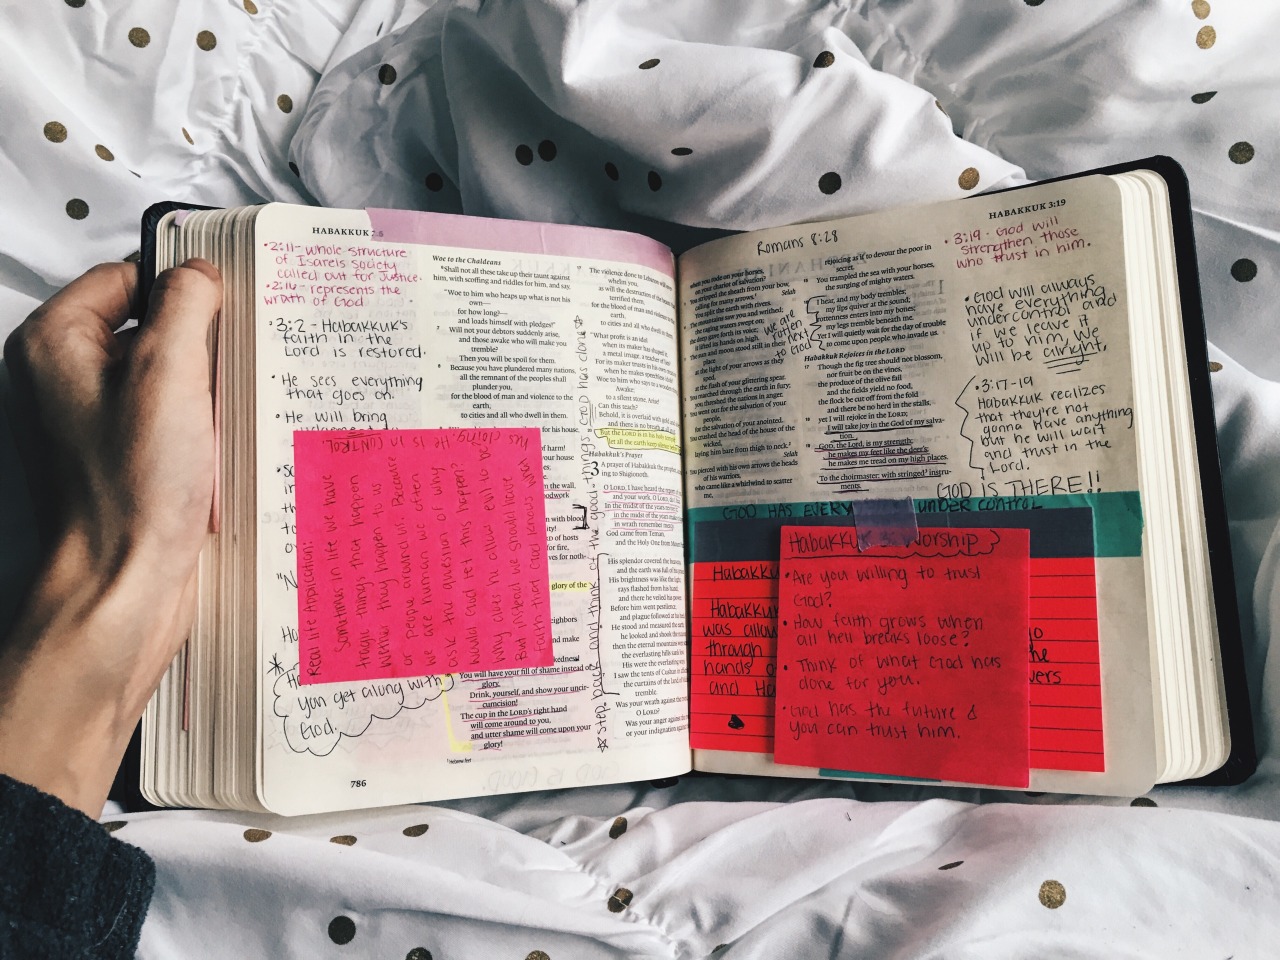 7 Bible Verses To Get You Through Midterms